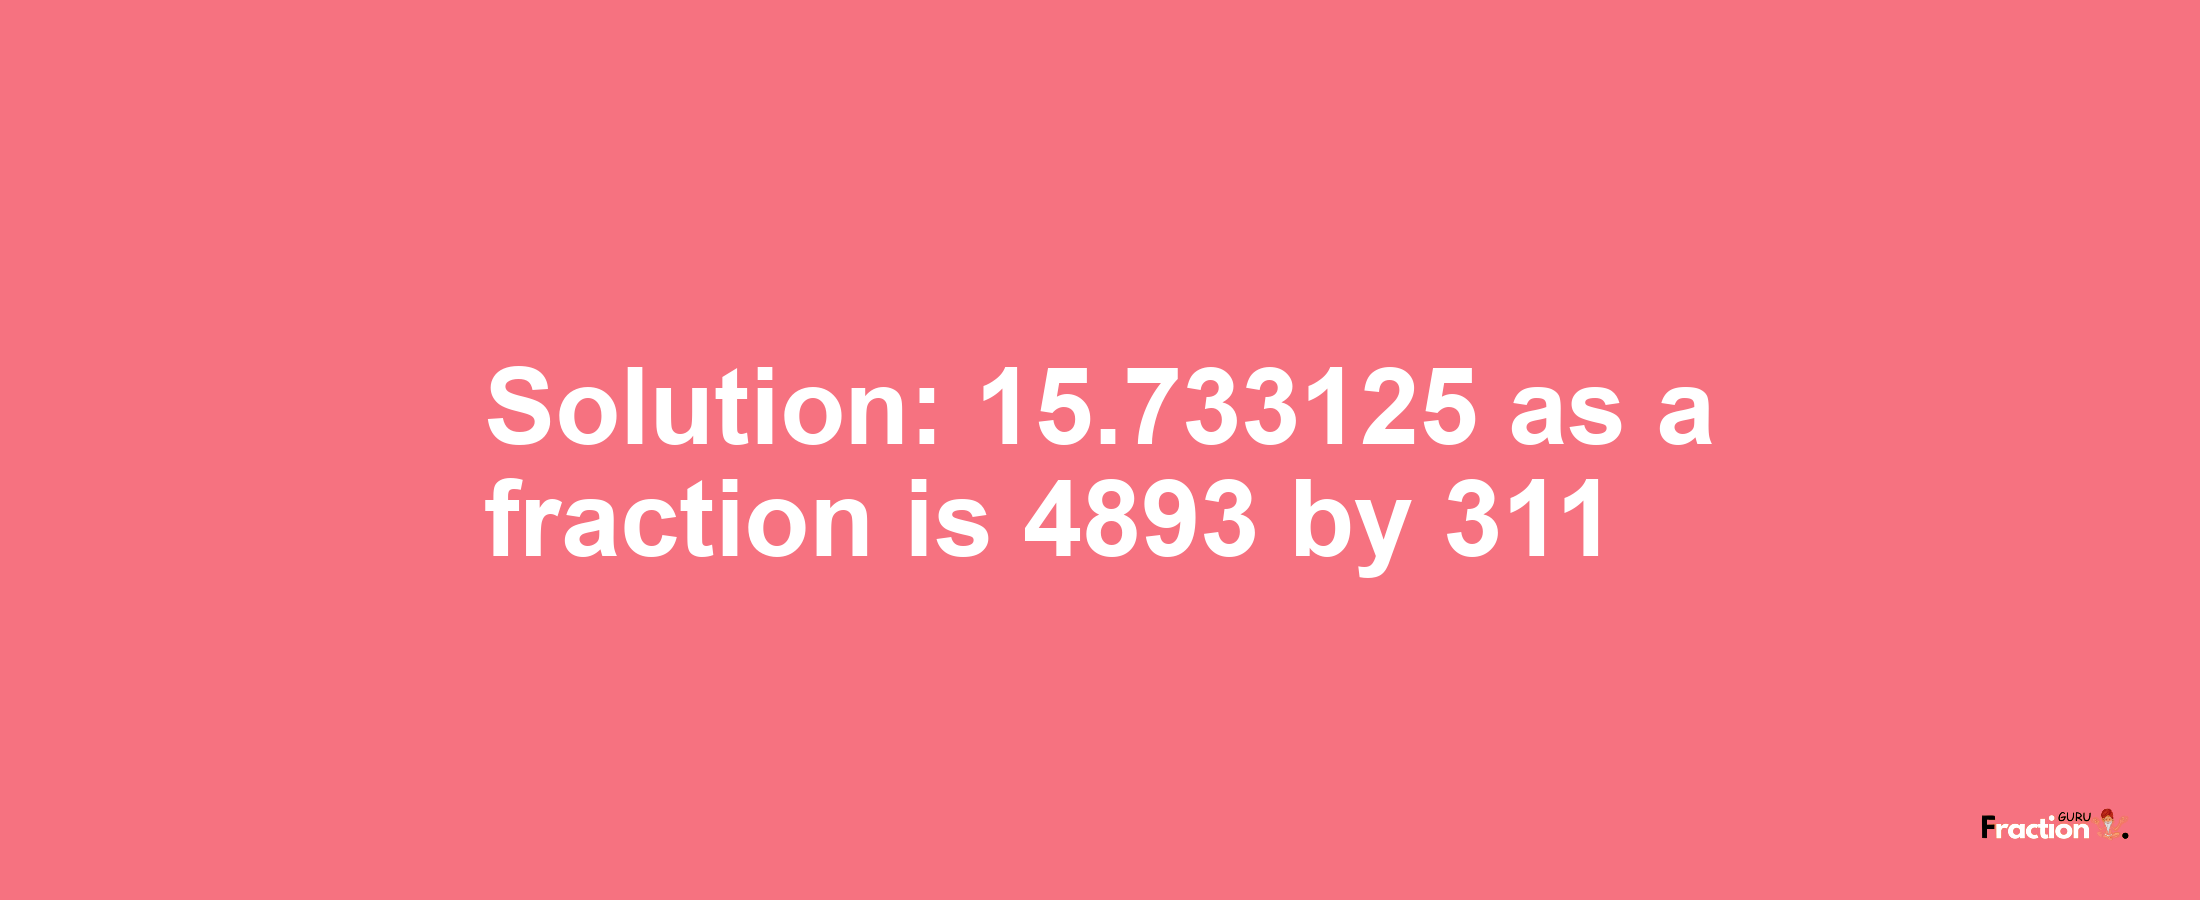 Solution:15.733125 as a fraction is 4893/311